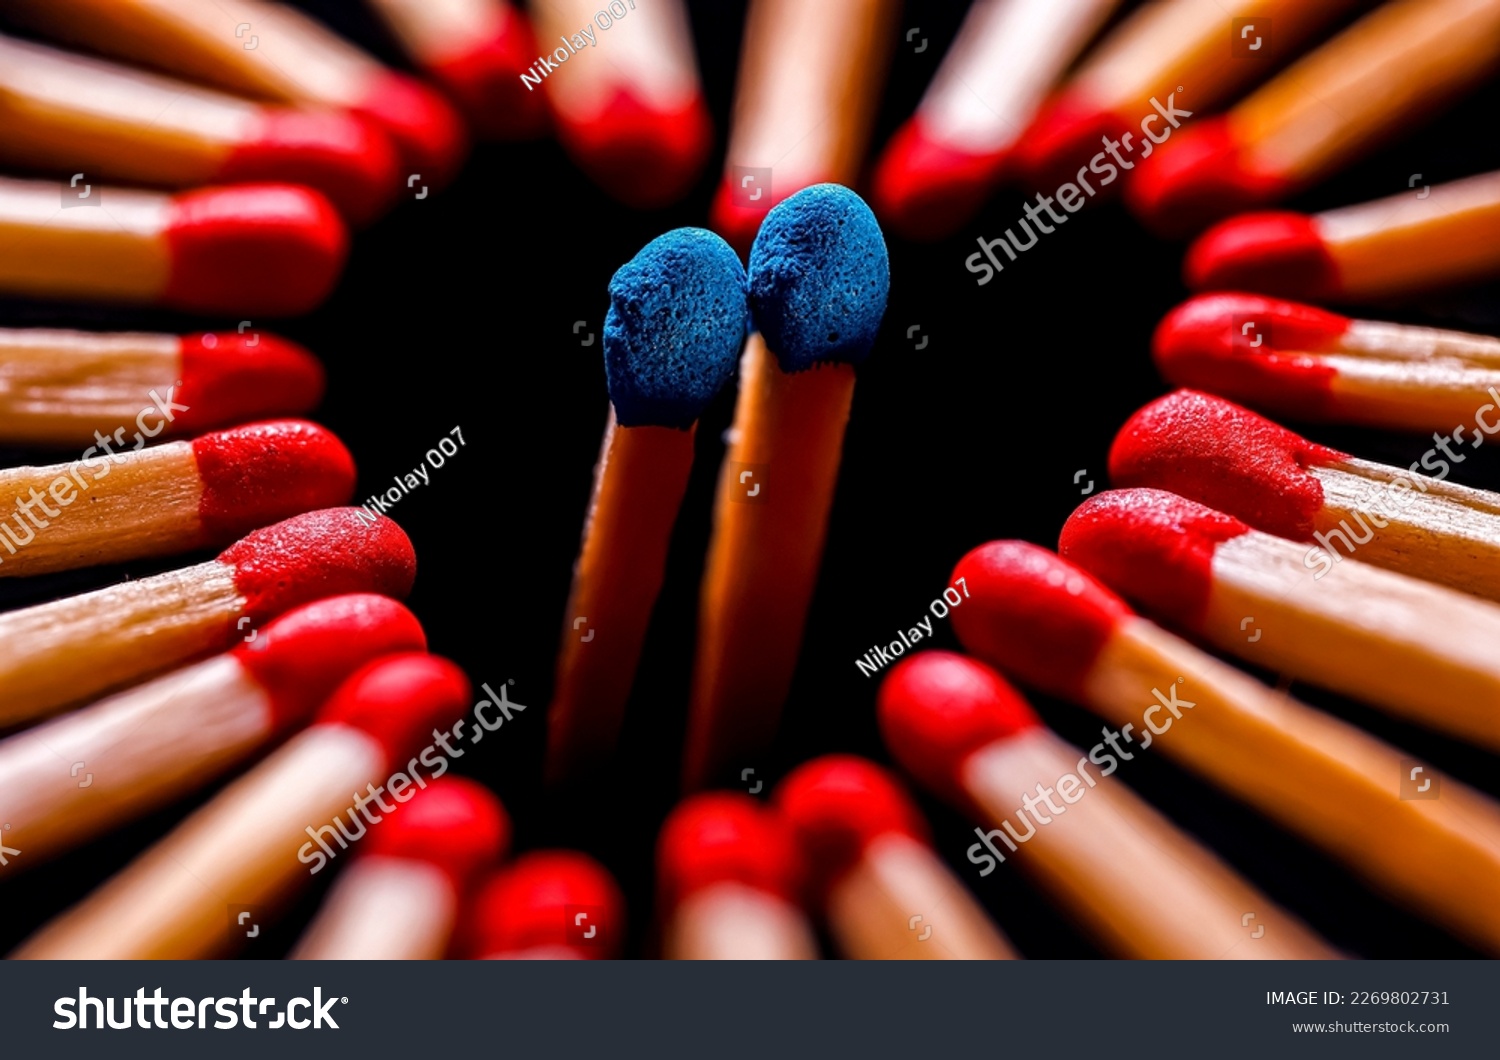 Red match heads are lined with a heart with two blue match heads inside. Matches close-up. Red and blue matches #2269802731